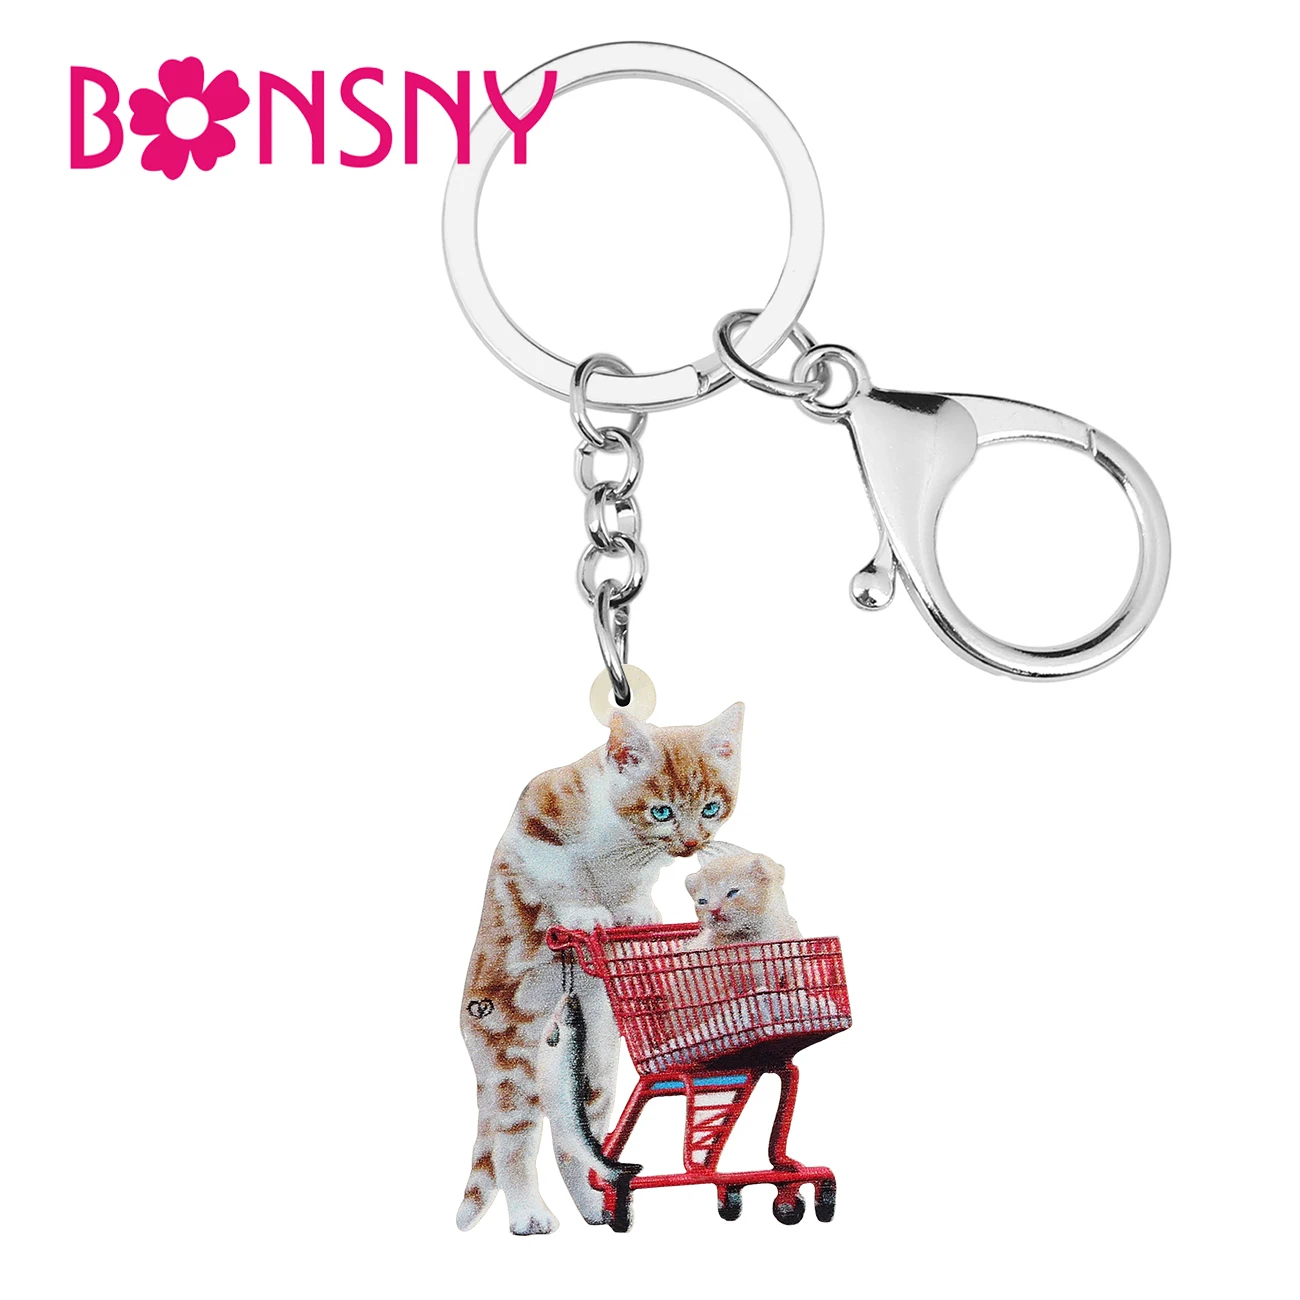 

BONSNY Acrylic Cute Cat Kitten Shopping Car Keychains Ring Fashion Purse Key Chain Charms Jewelry For Women Girls Party Gifts